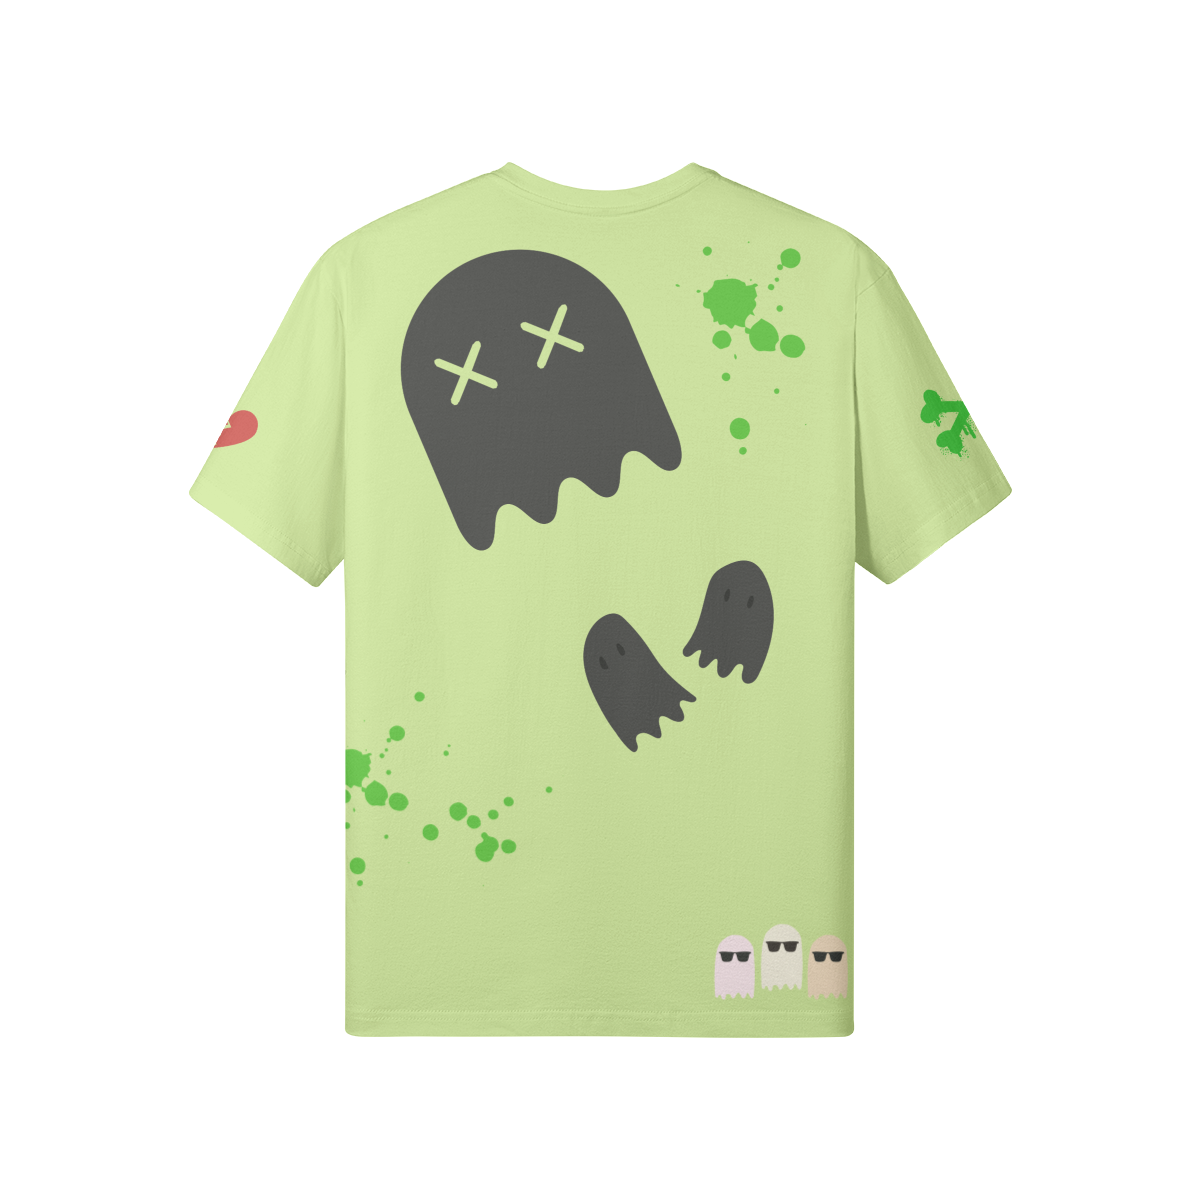 "Slime Time" Tee (Limited)